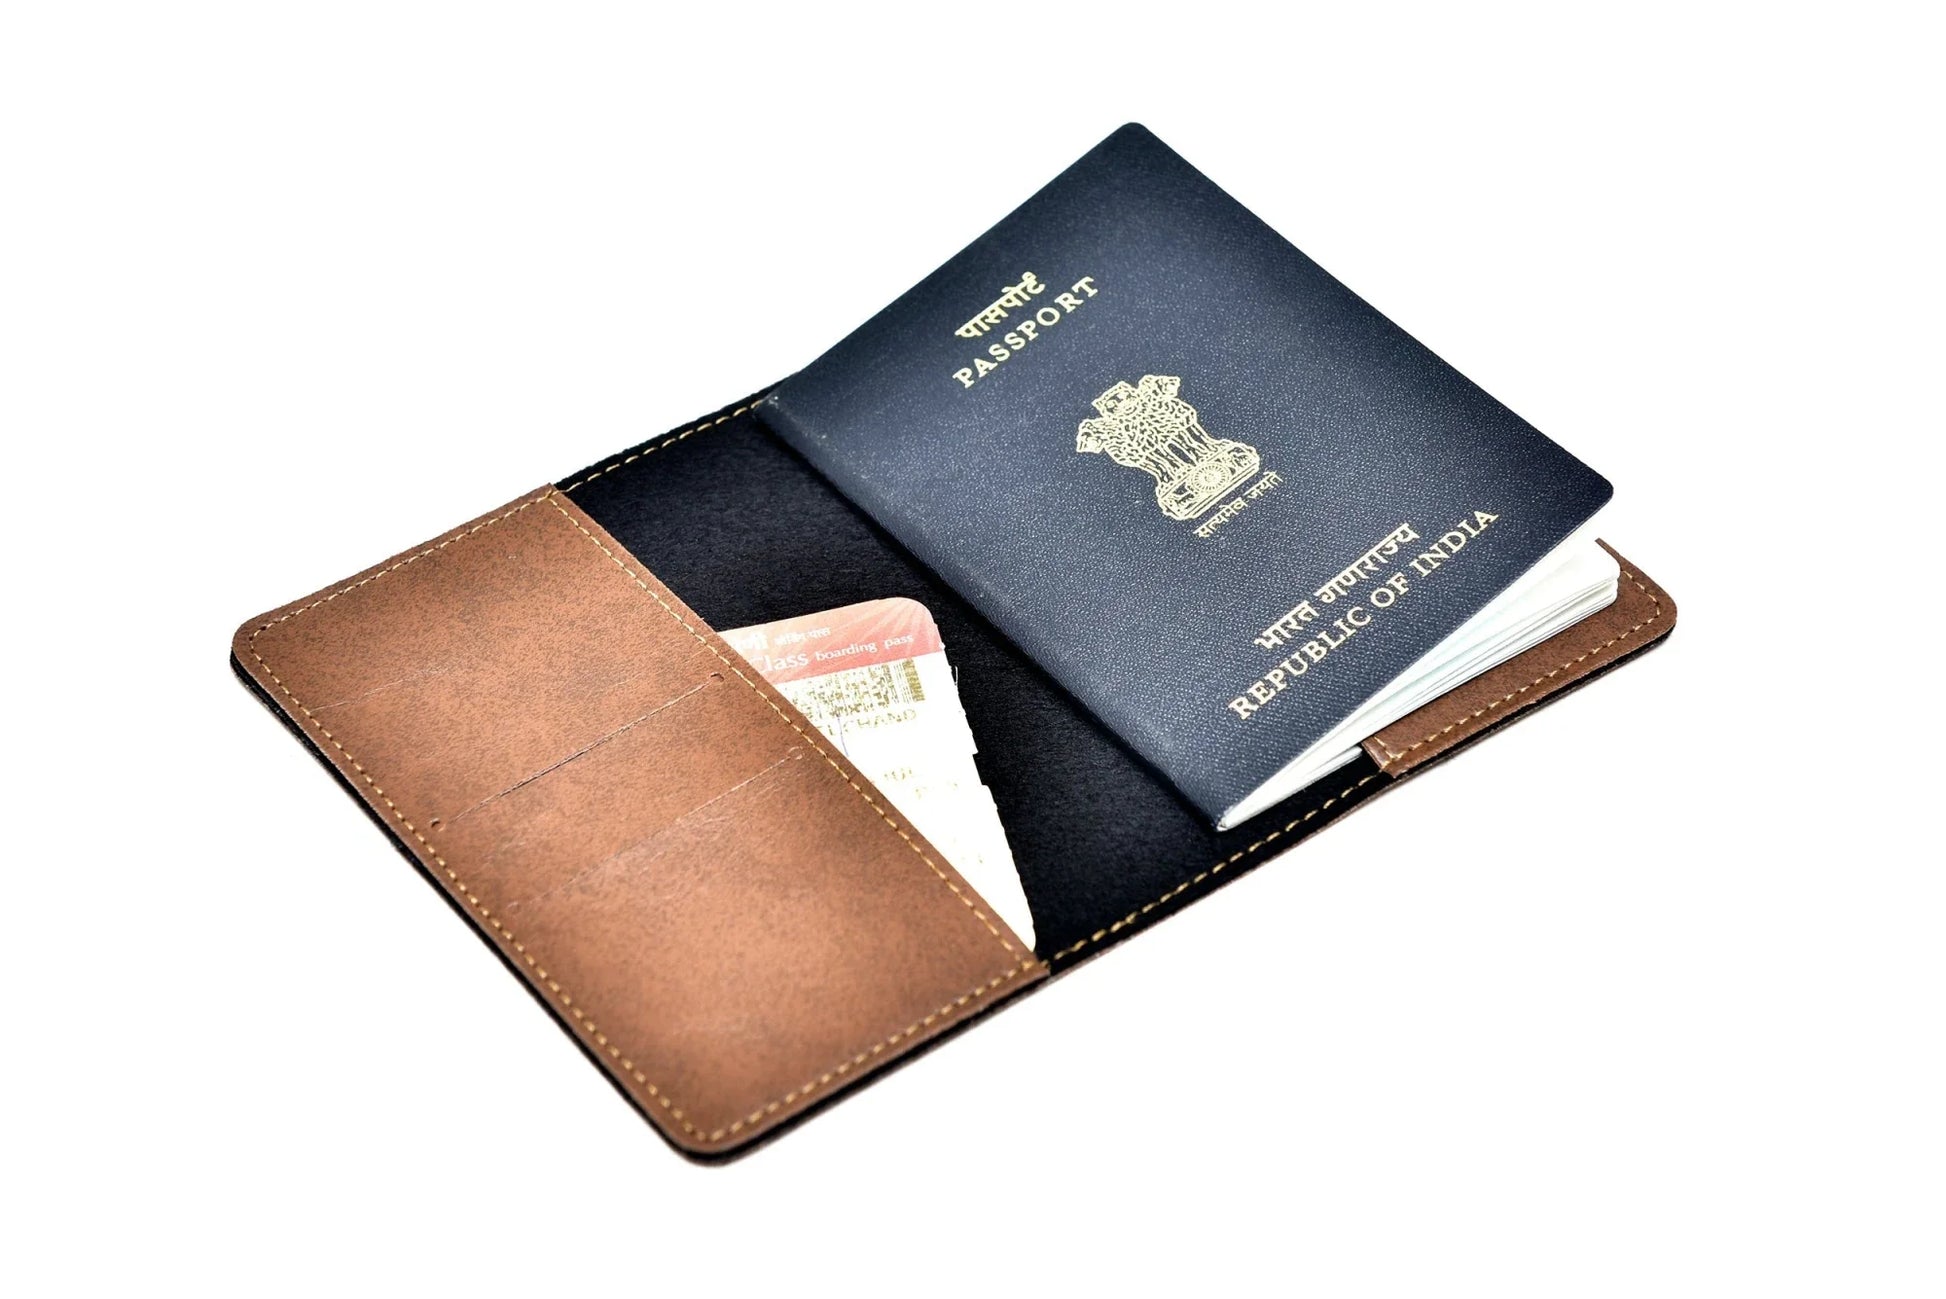 Inside or open view of tan passport cover